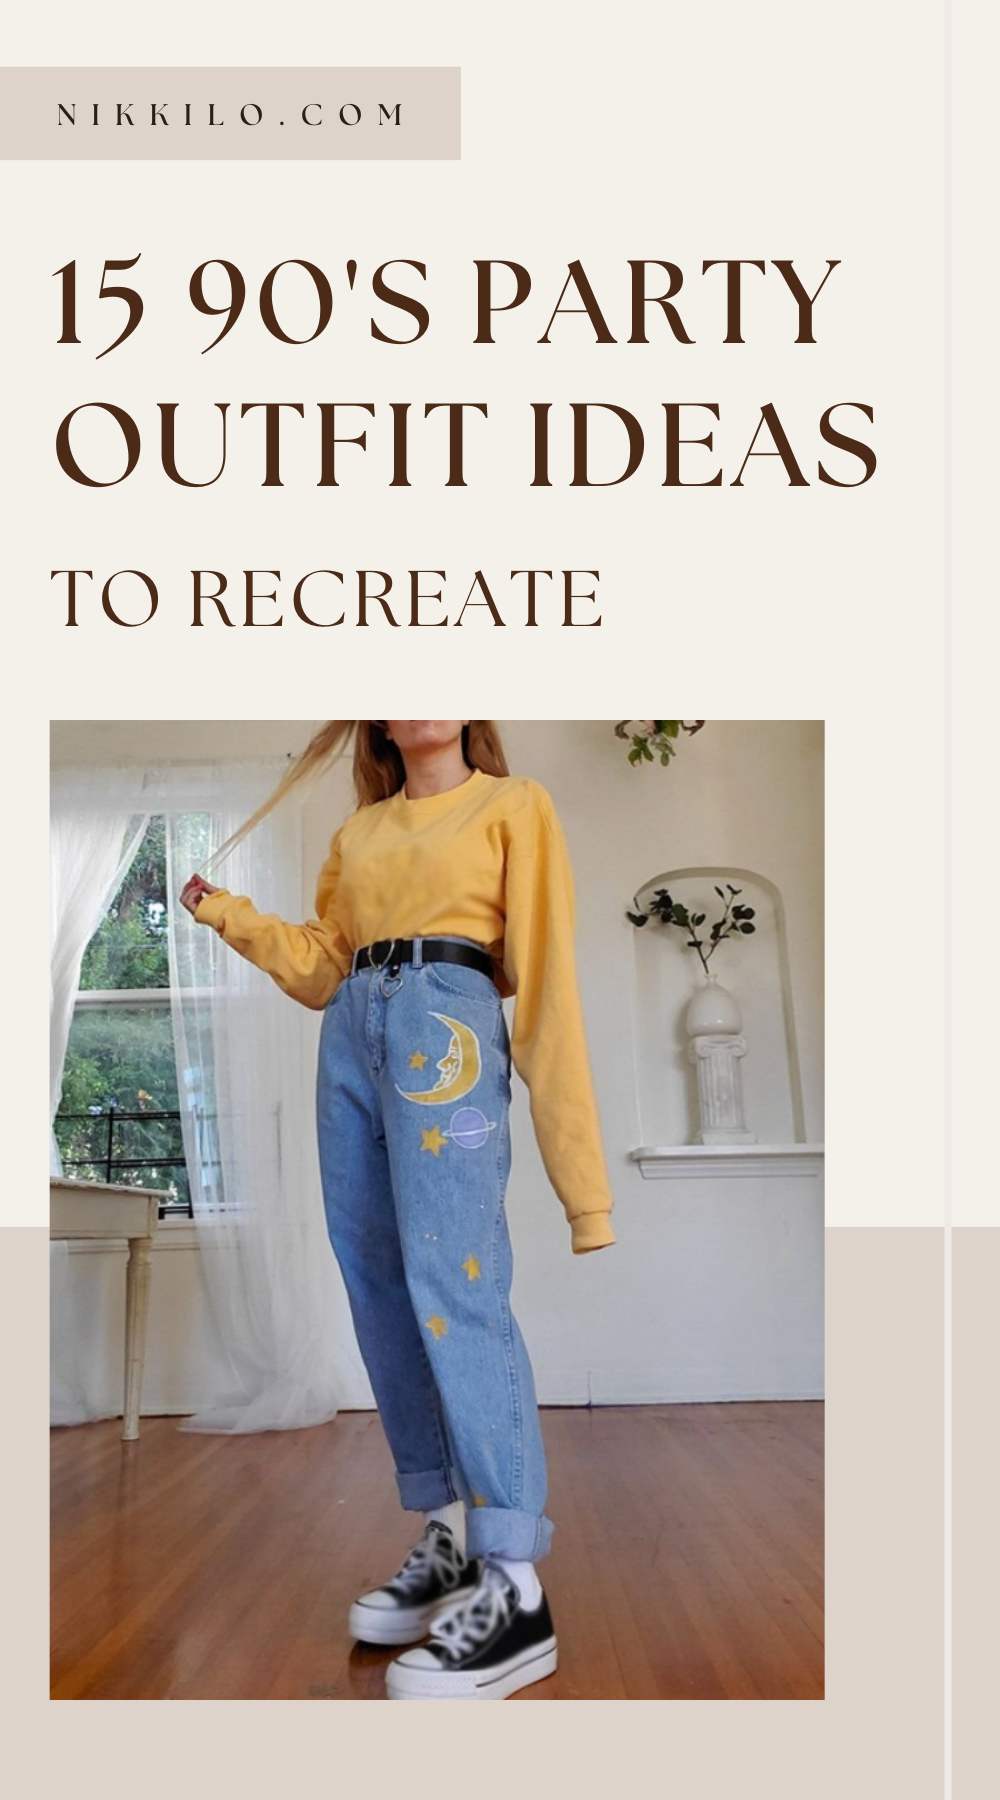 15 CUTEST 90s Party Outfit Ideas To Recreate! (Inspiration) — Nikki Lo